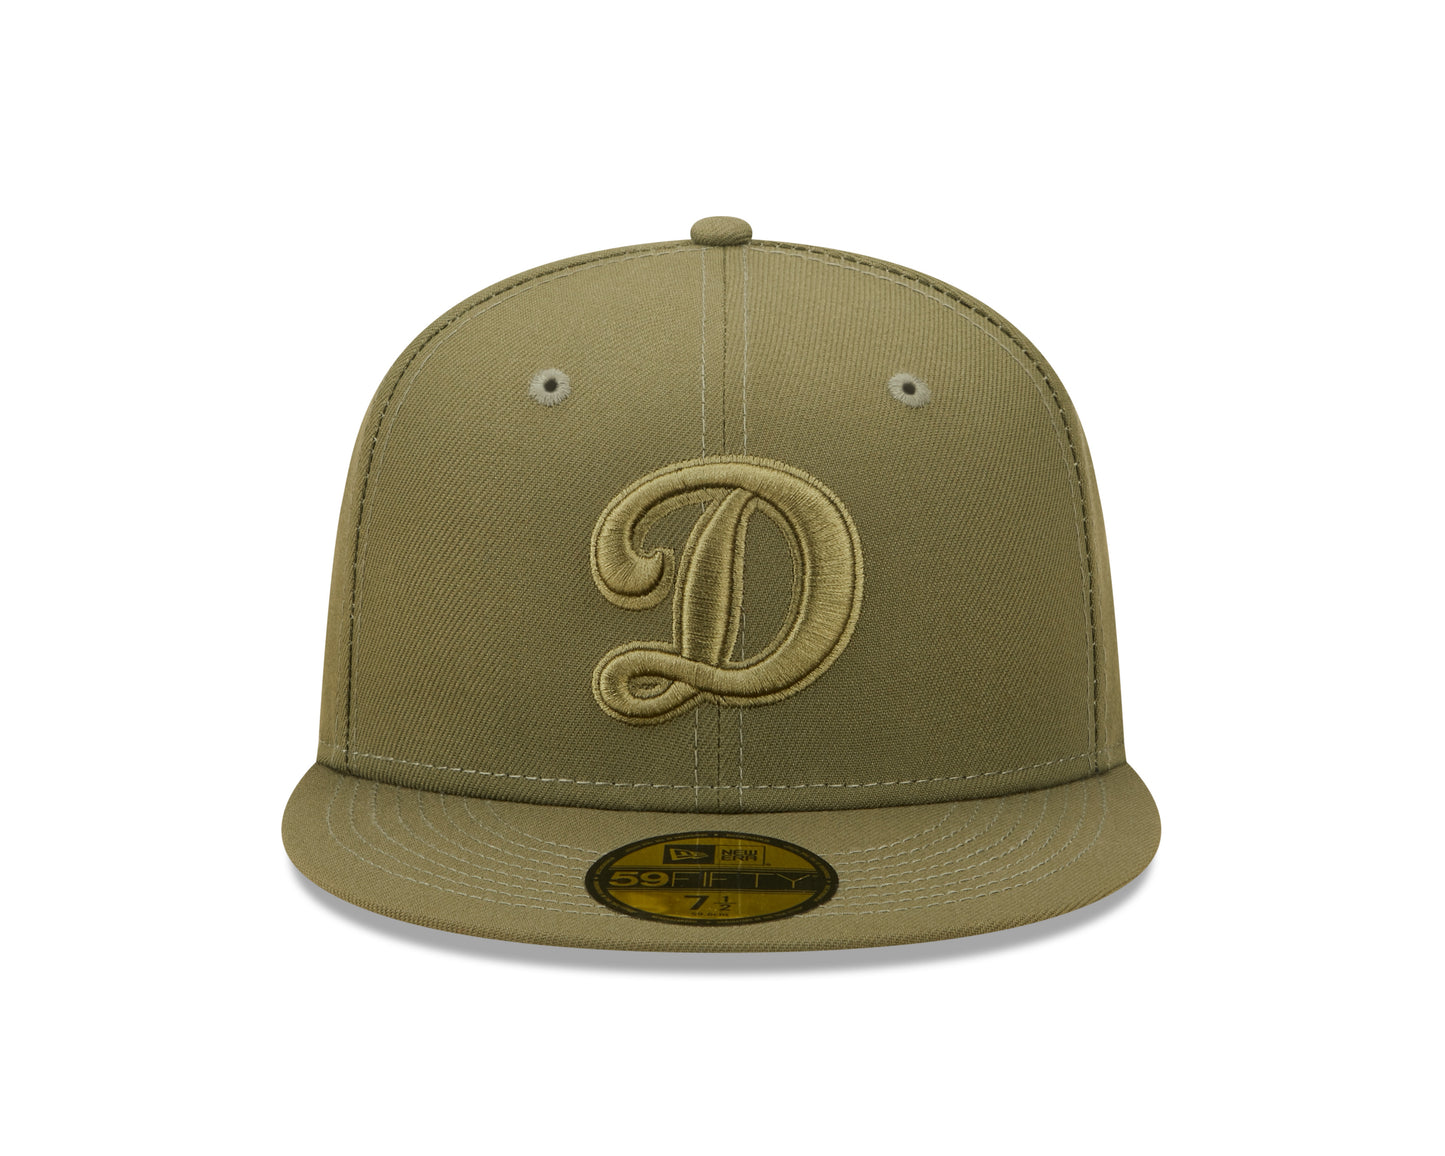 Los Angeles Dodgers "D" New Era Color Pack New Olive 59fifty Fitted Hat